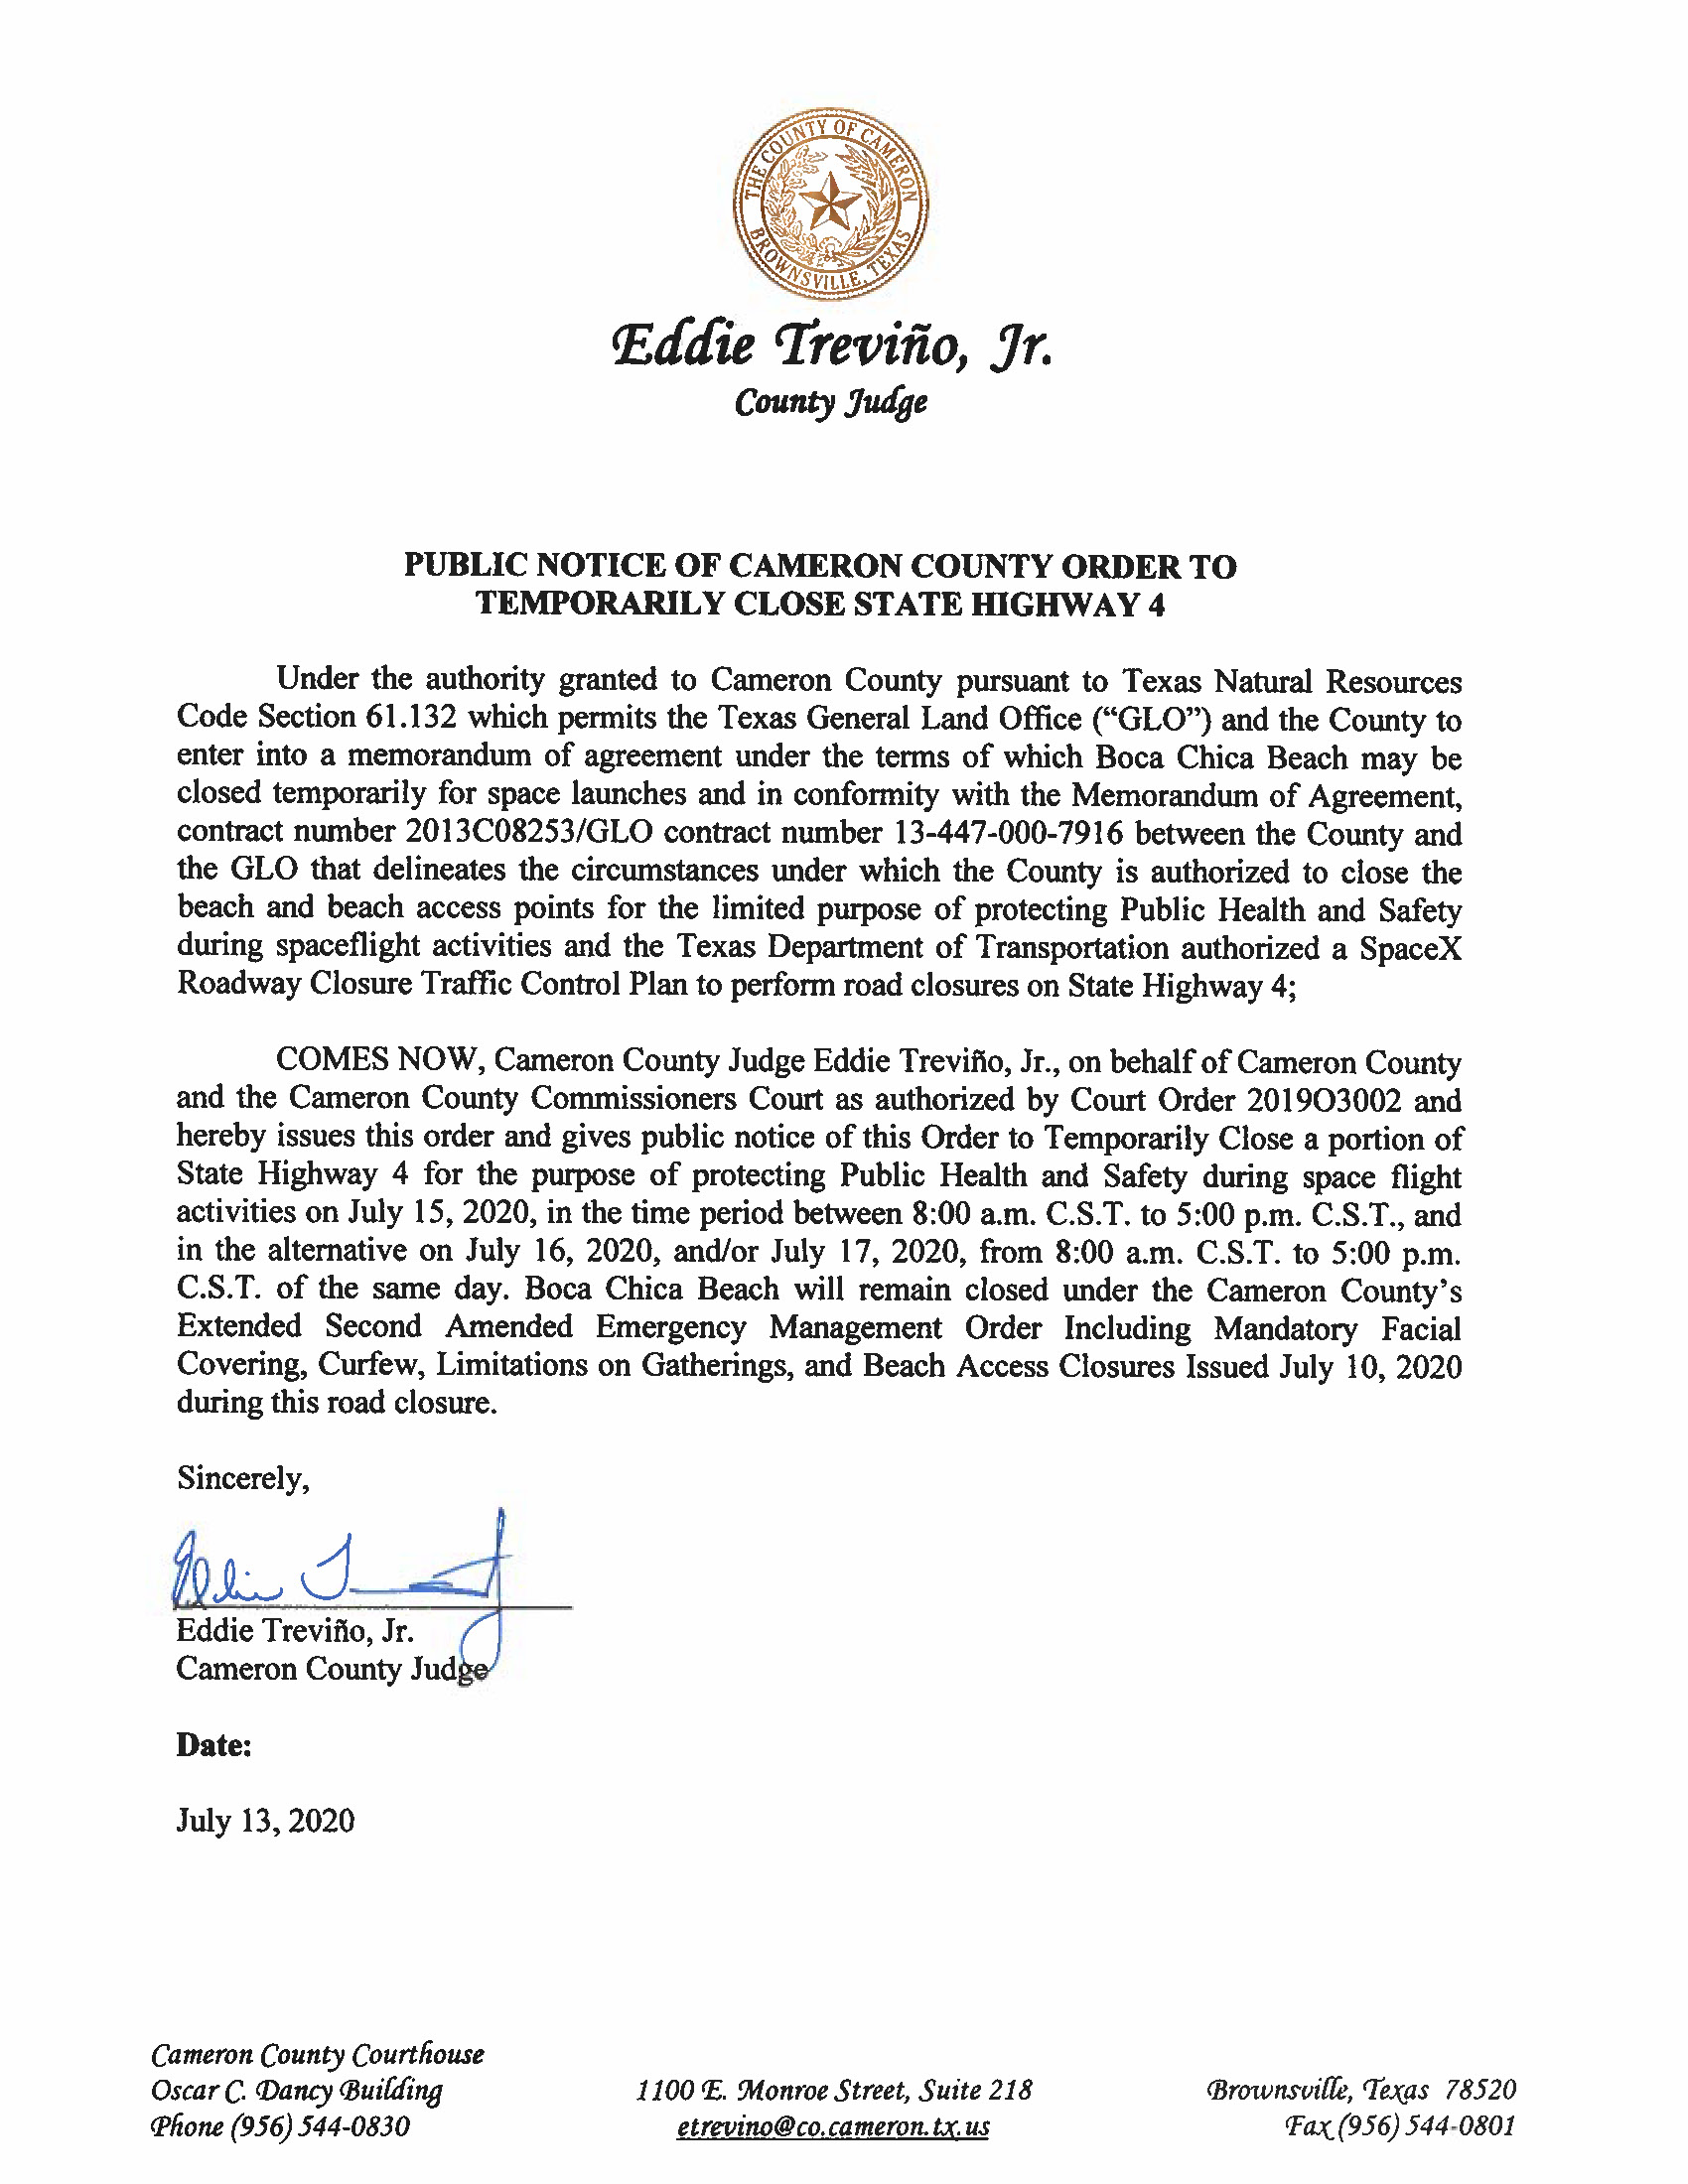 PUBLIC NOTICE OF CAMERON COUNTY ORDER TO TEMP. ROAD CLOSURE. 07.15.20.docx Page 1